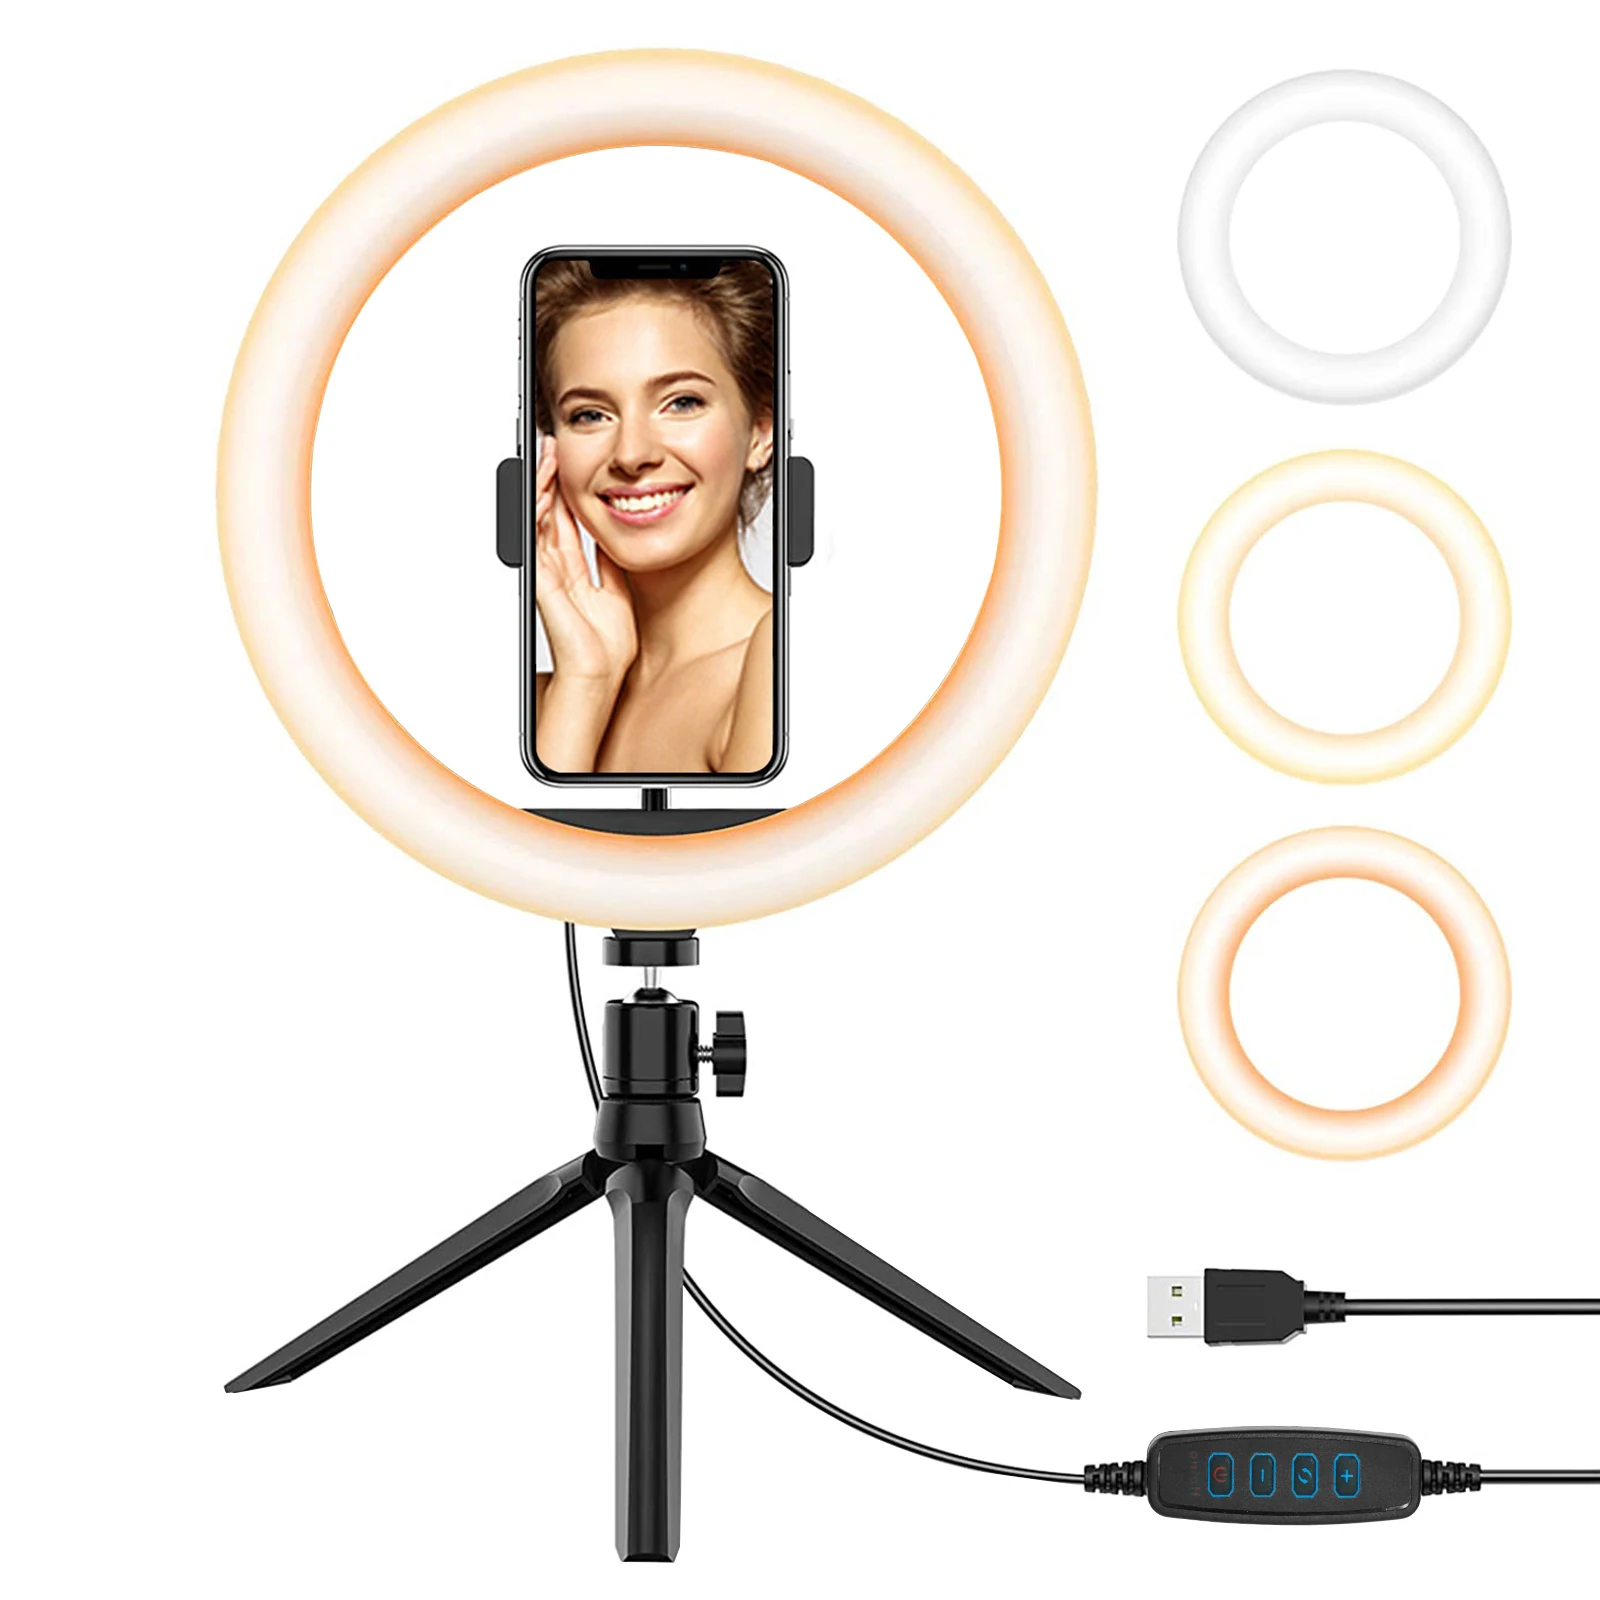 

2022 New Selfie Ring Light with Tripod Stand & Cell Phone Holder for Live Stream/Makeup, Mini Led Camera Ringlight for YouTube